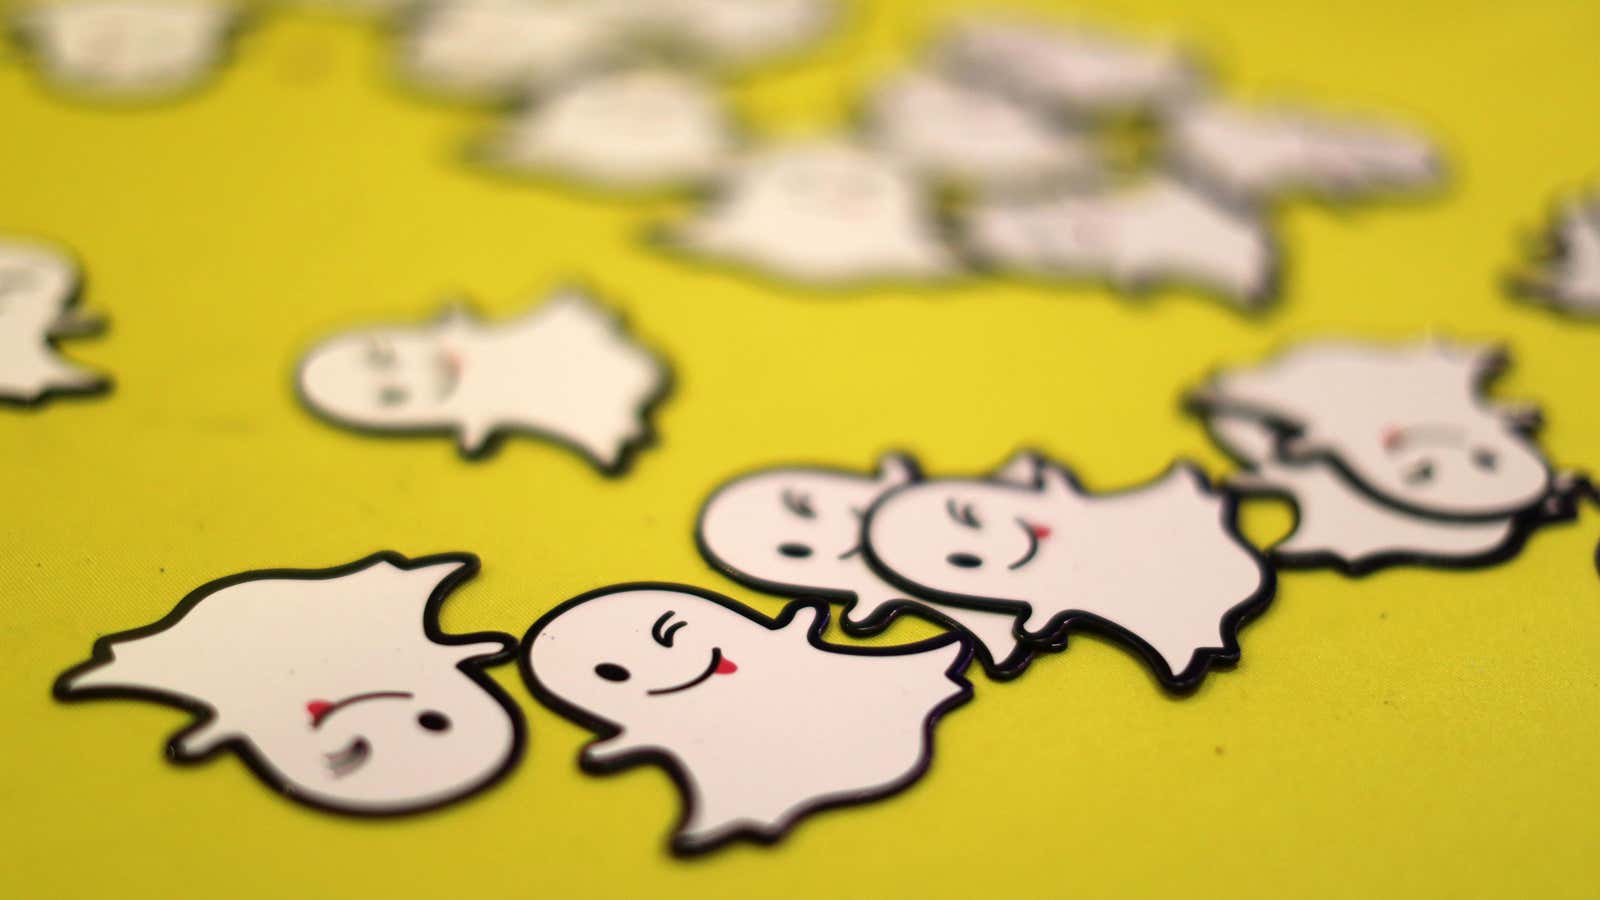 Snapchat wants to help its users spend their money.